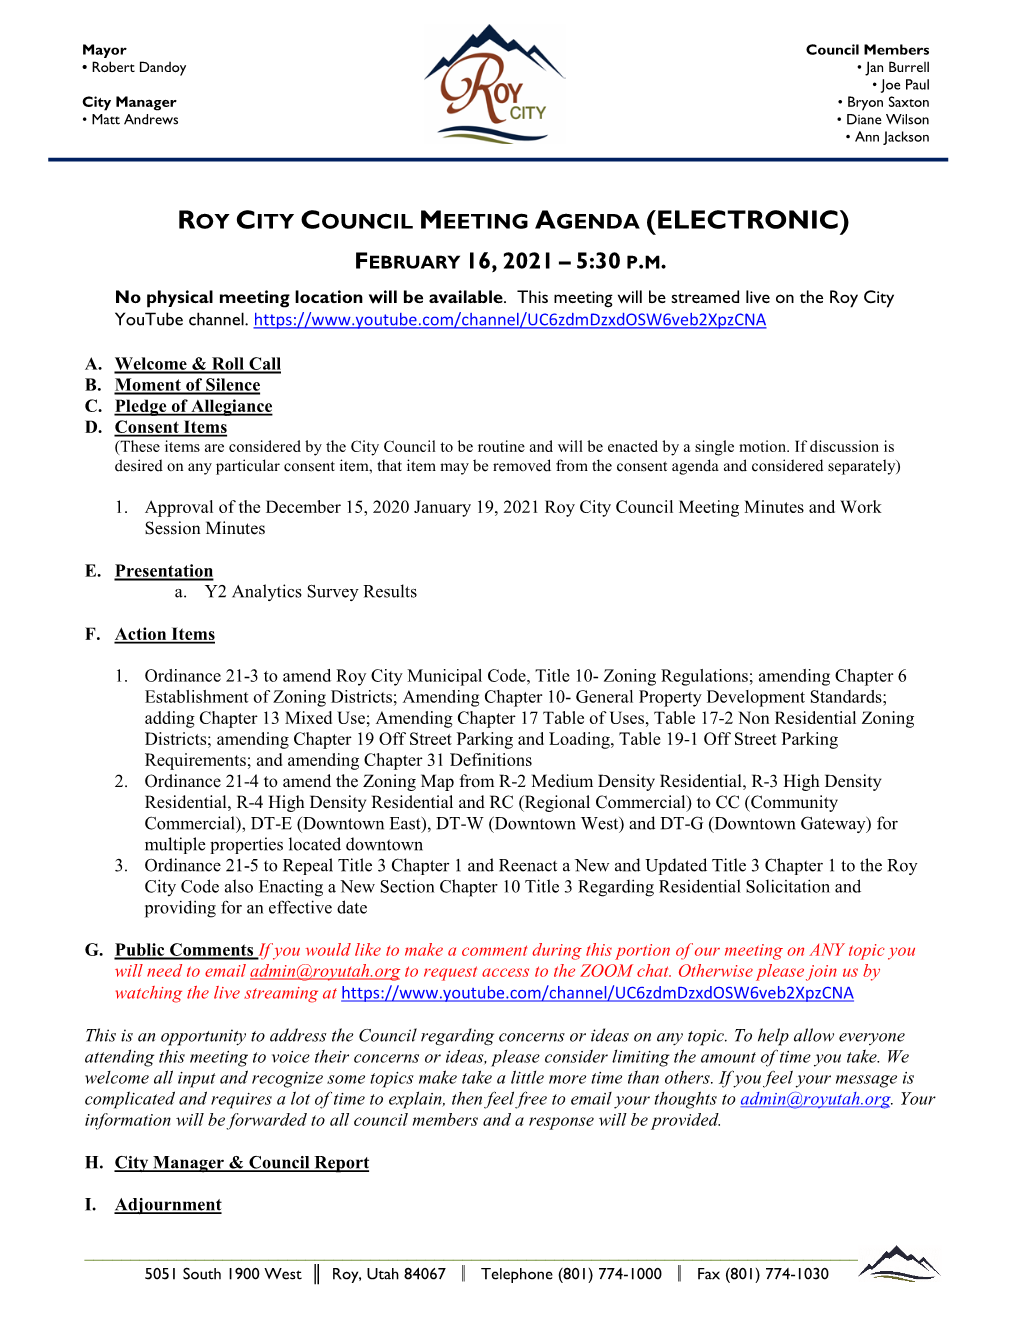 February 16, 2021 Roy City Council Meeting Agenda And